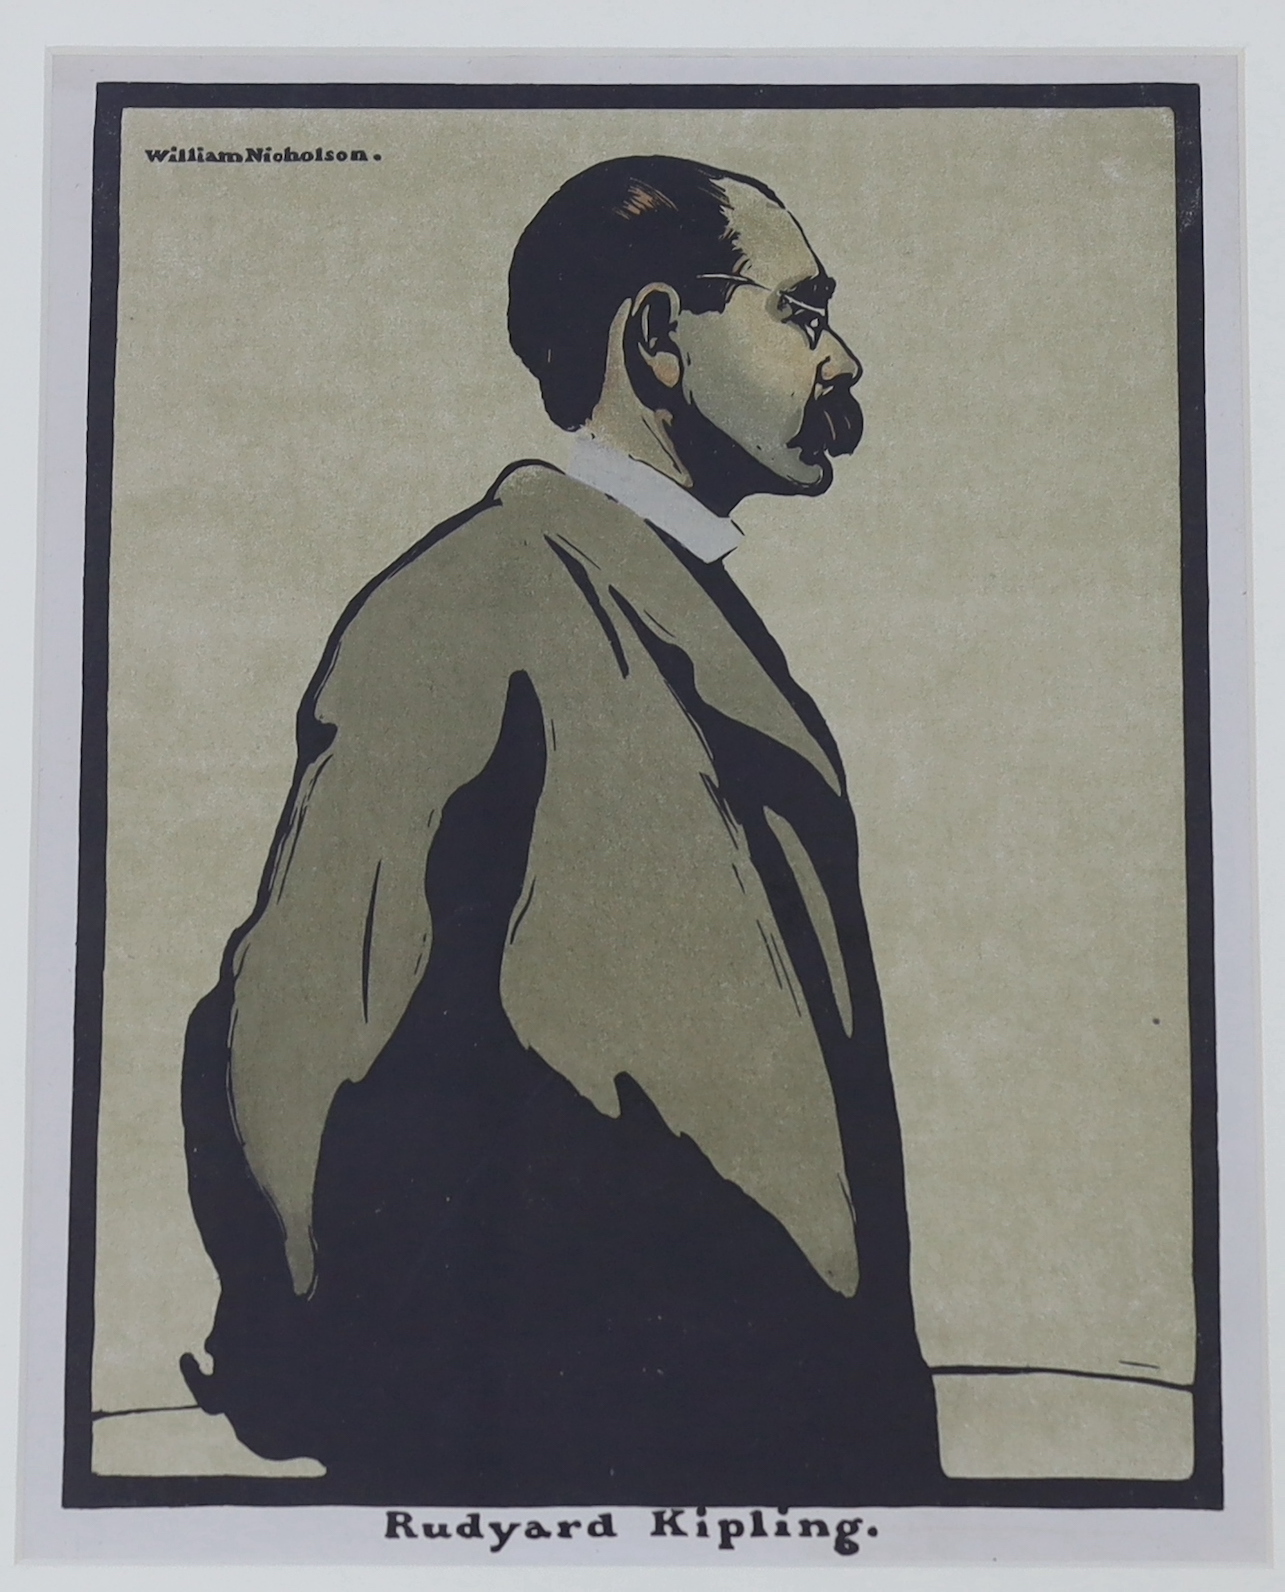 William Nicholson (1872–1949) Rudyard Kipling and Q for Quaker, two wood cuts/lithographs, the largest 29cm x 23cm